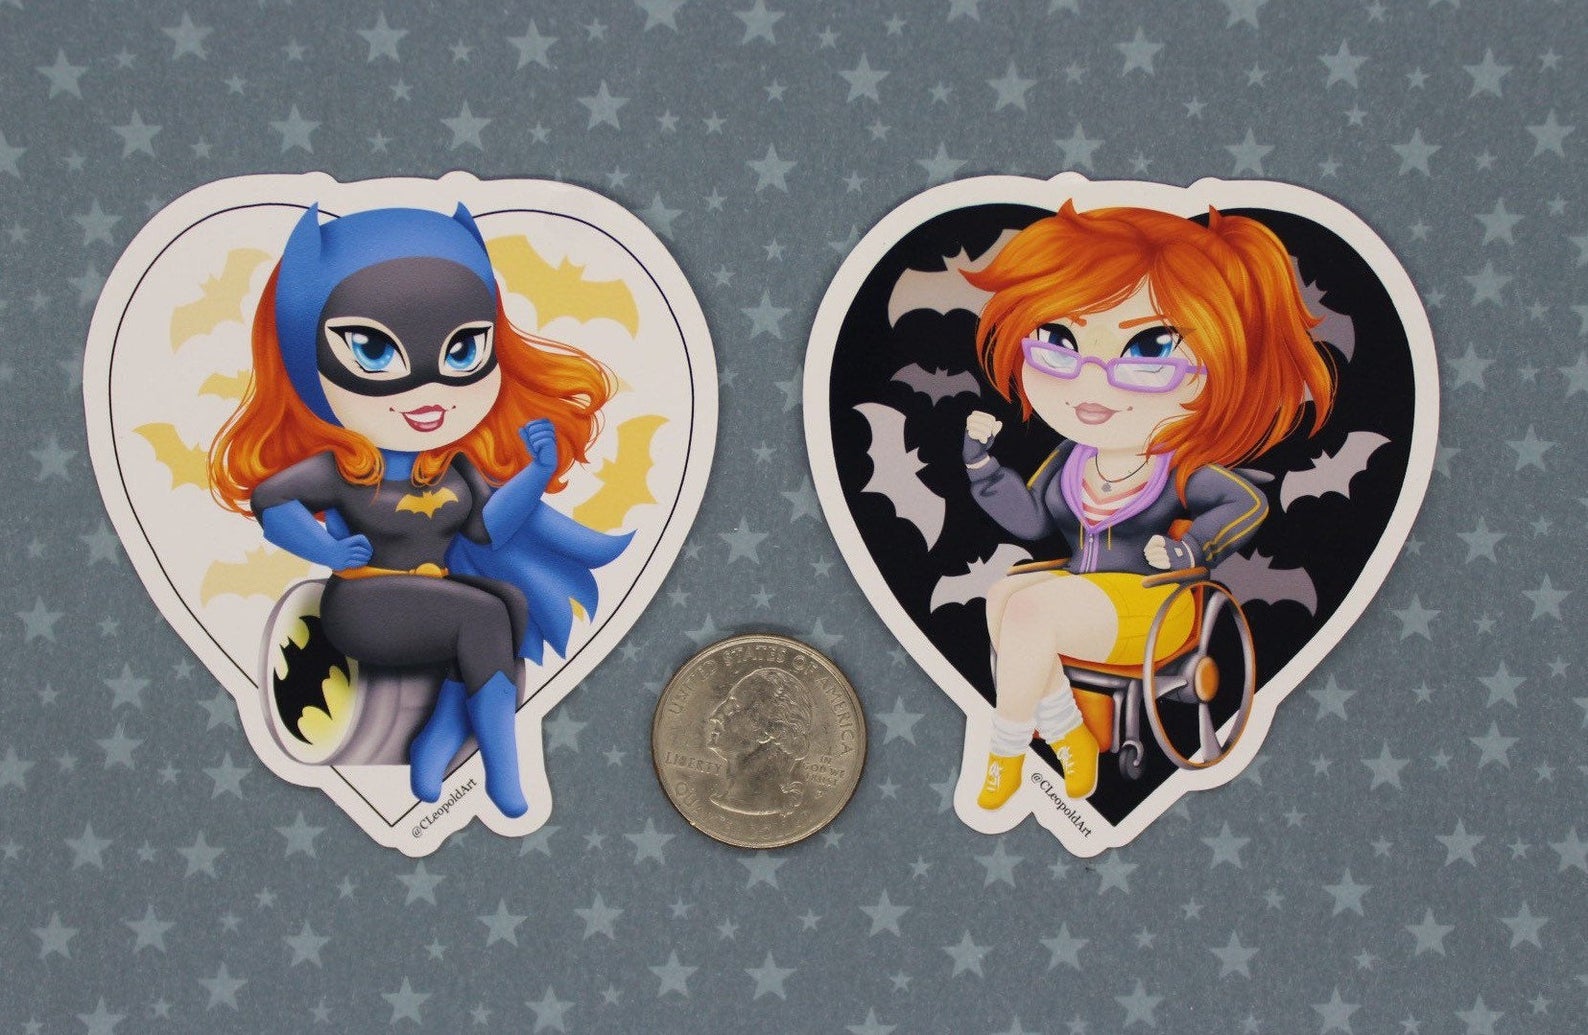 https://www.etsy.com/listing/720787740/batgirl-sticker?ga_order=most_relevant&ga_search_type=all&ga_view_type=gallery&ga_search_query=batgirl+sticker&ref=sr_gallery-1-9&organic_search_click=1